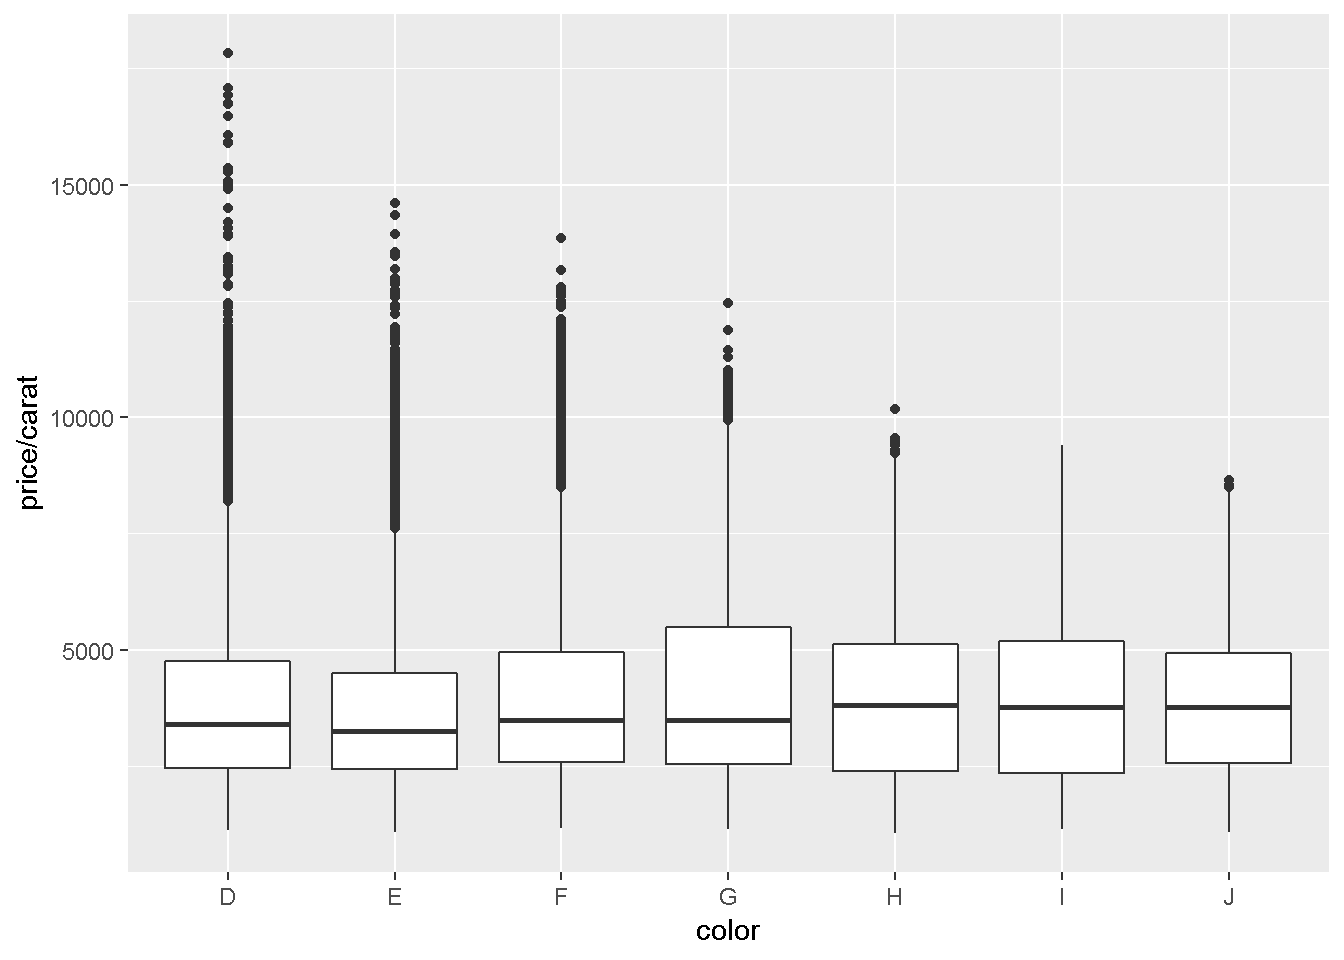 Boxplot graphic generated by R, see longdesc